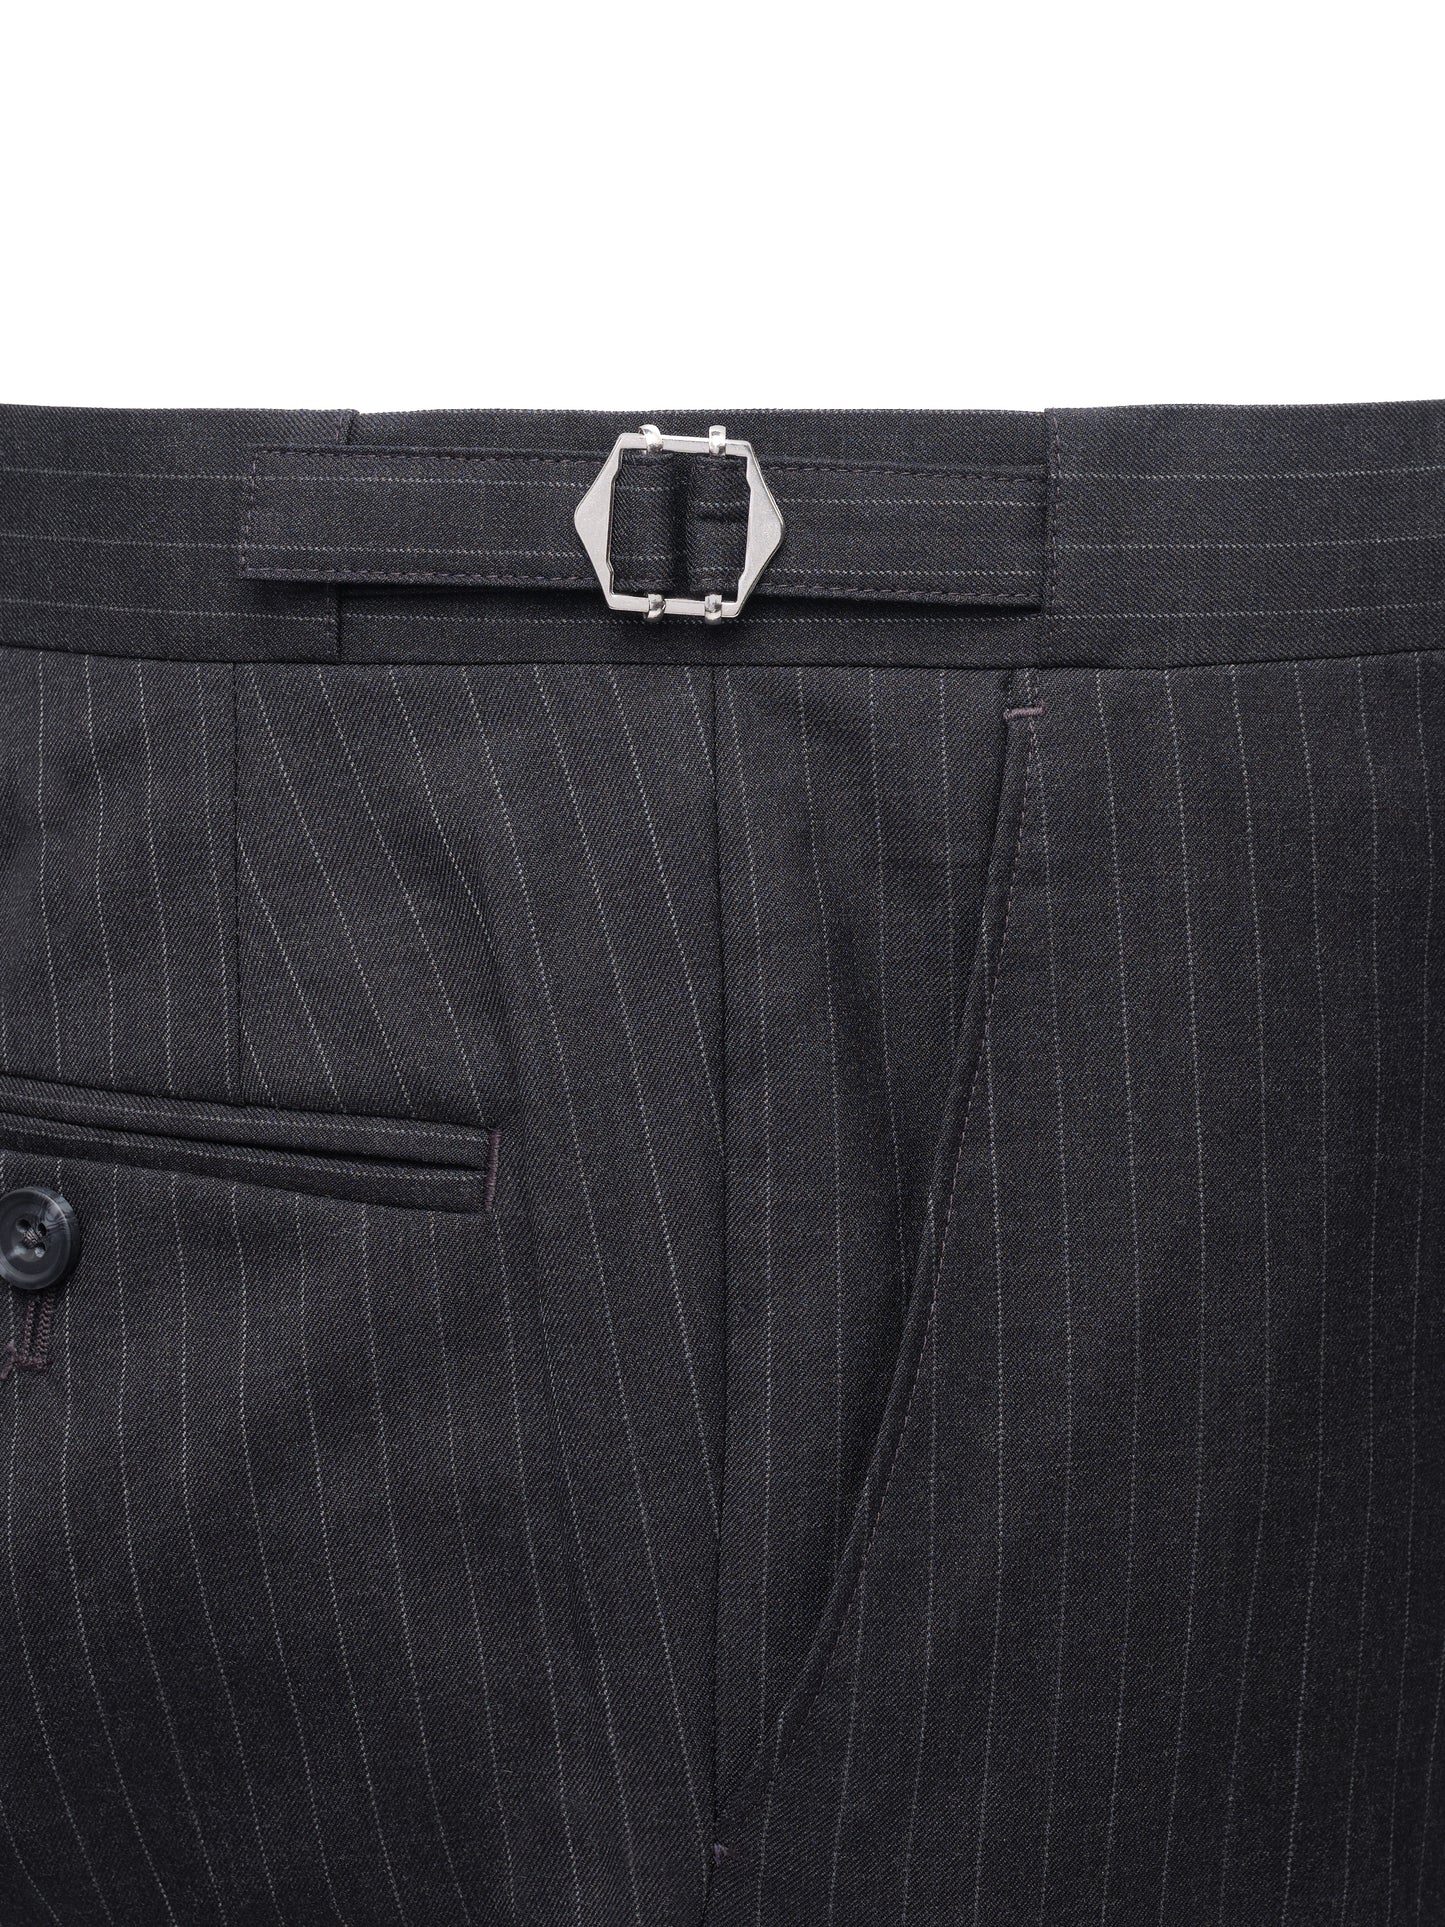 Limited Edition Eaton Suit - Grey Pinstripe Lightweight